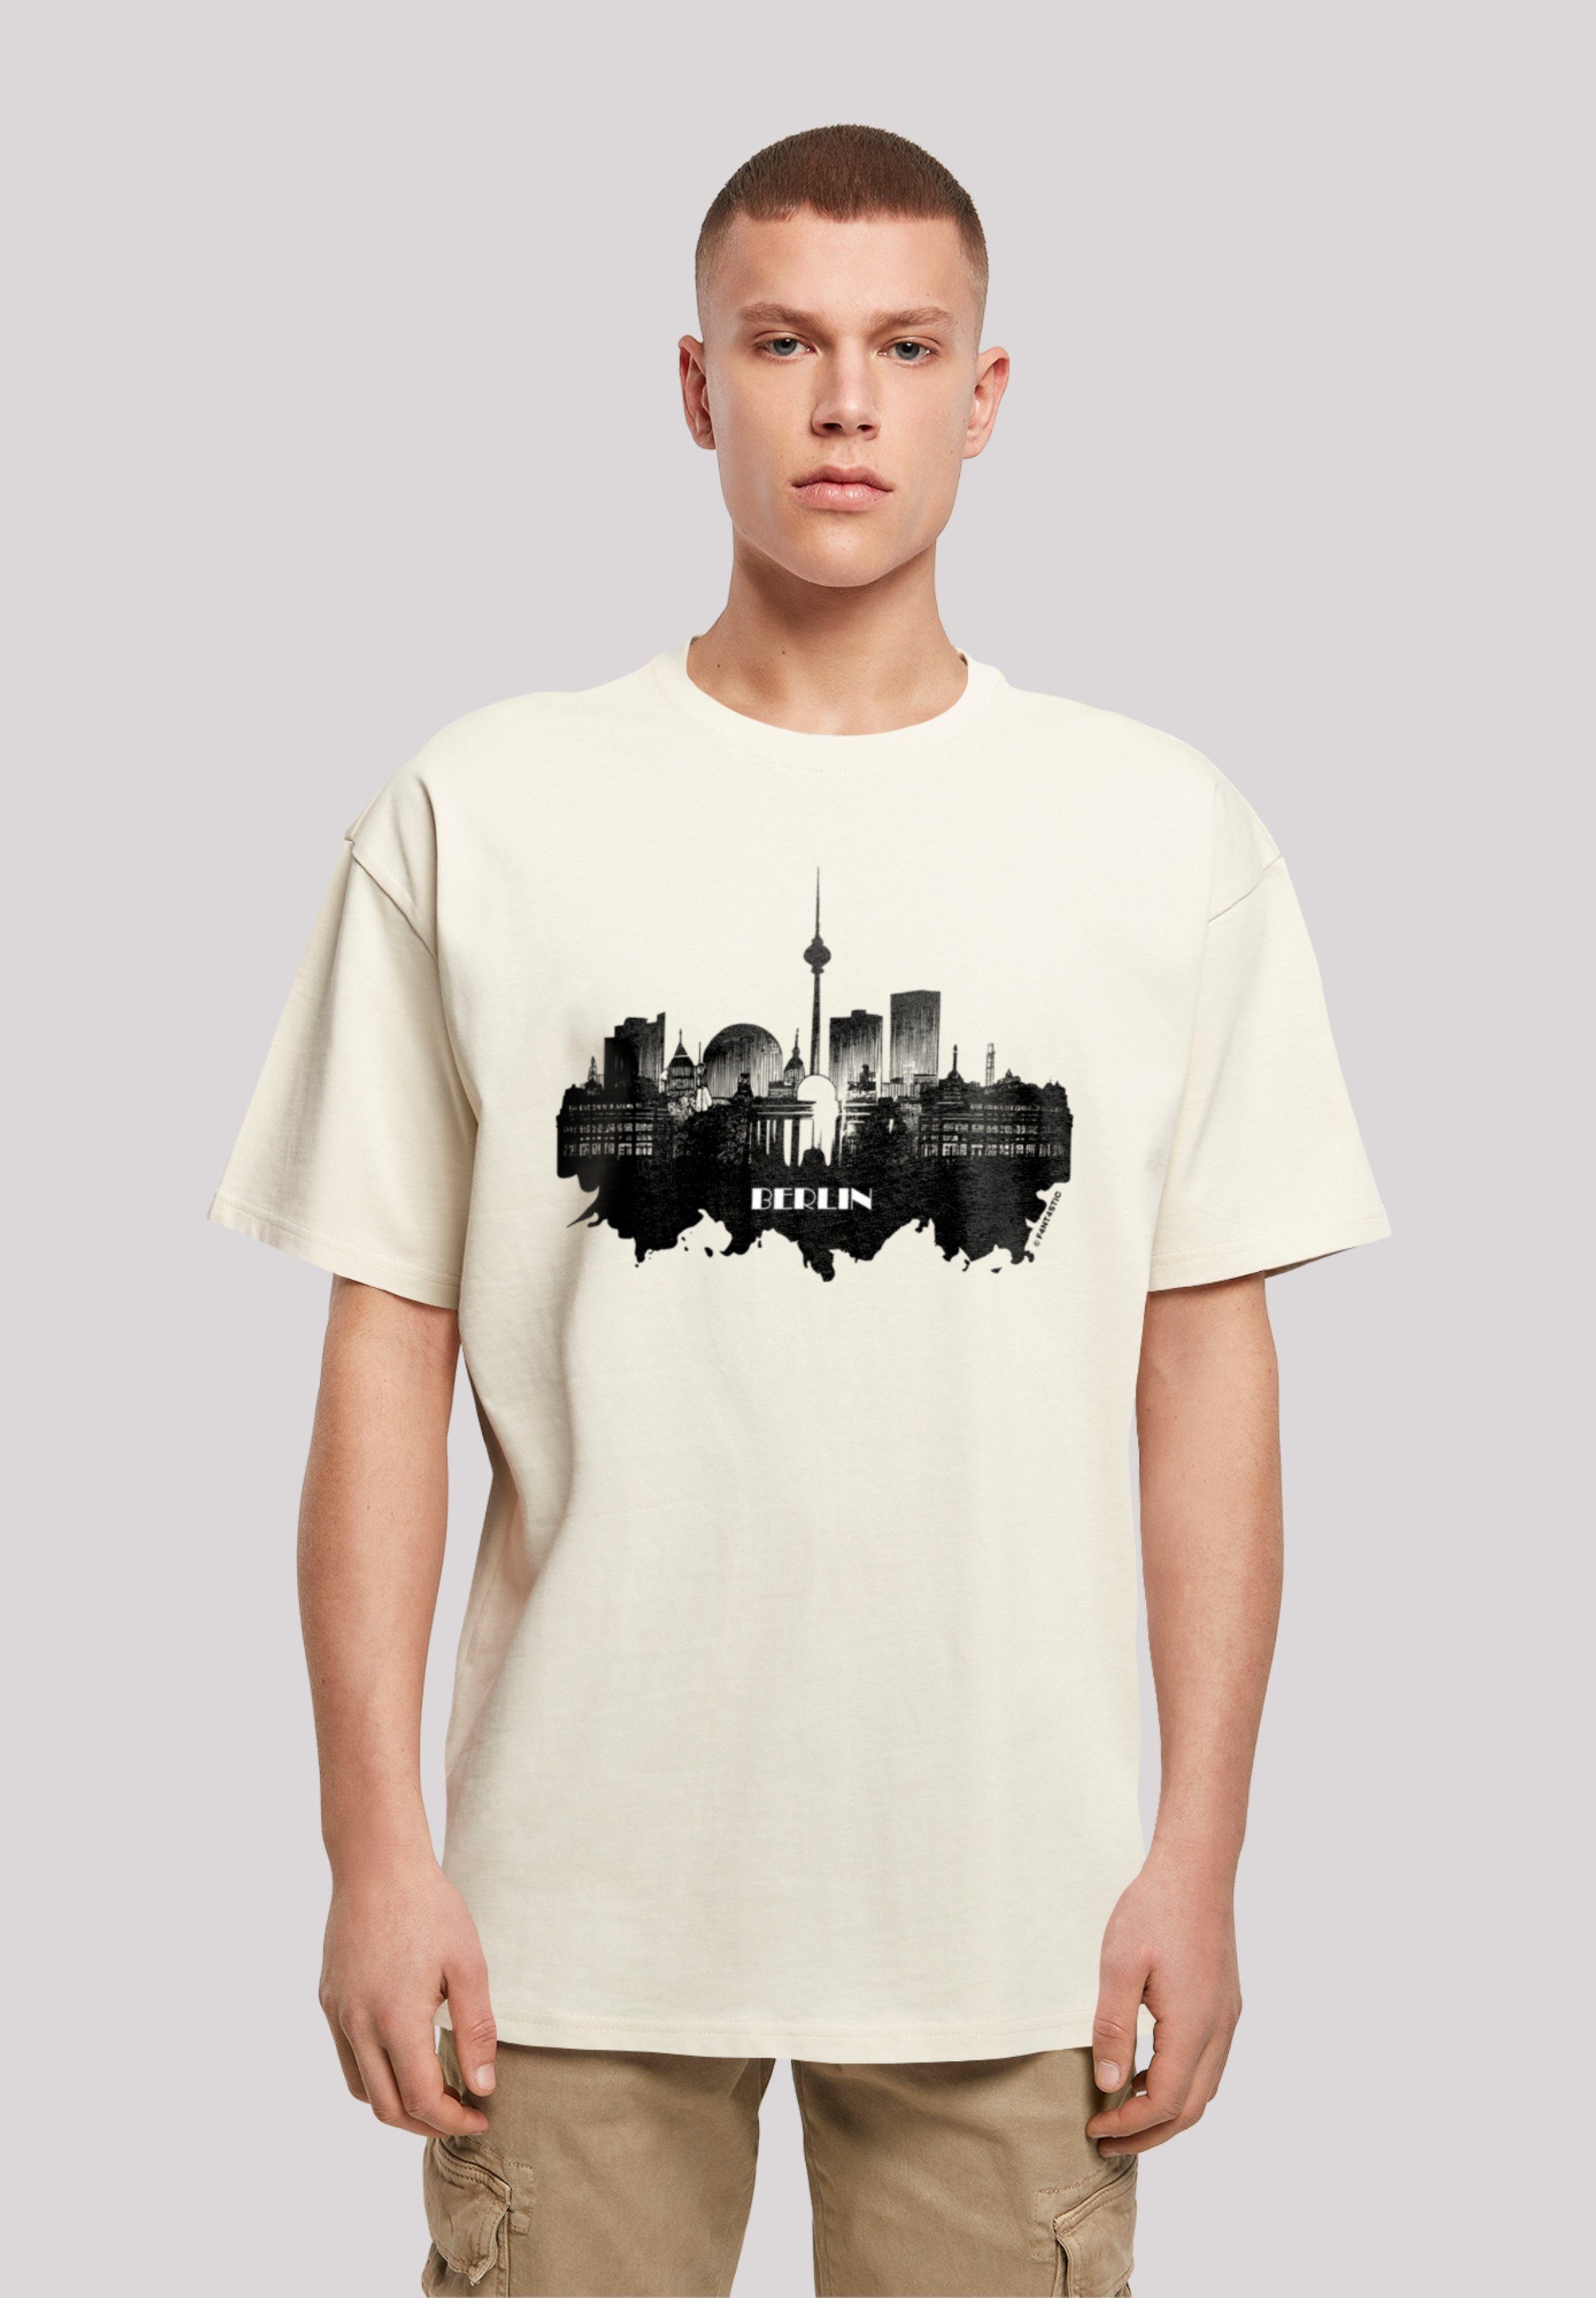 Collection - T-Shirt sand Berlin skyline F4NT4STIC Print Cities